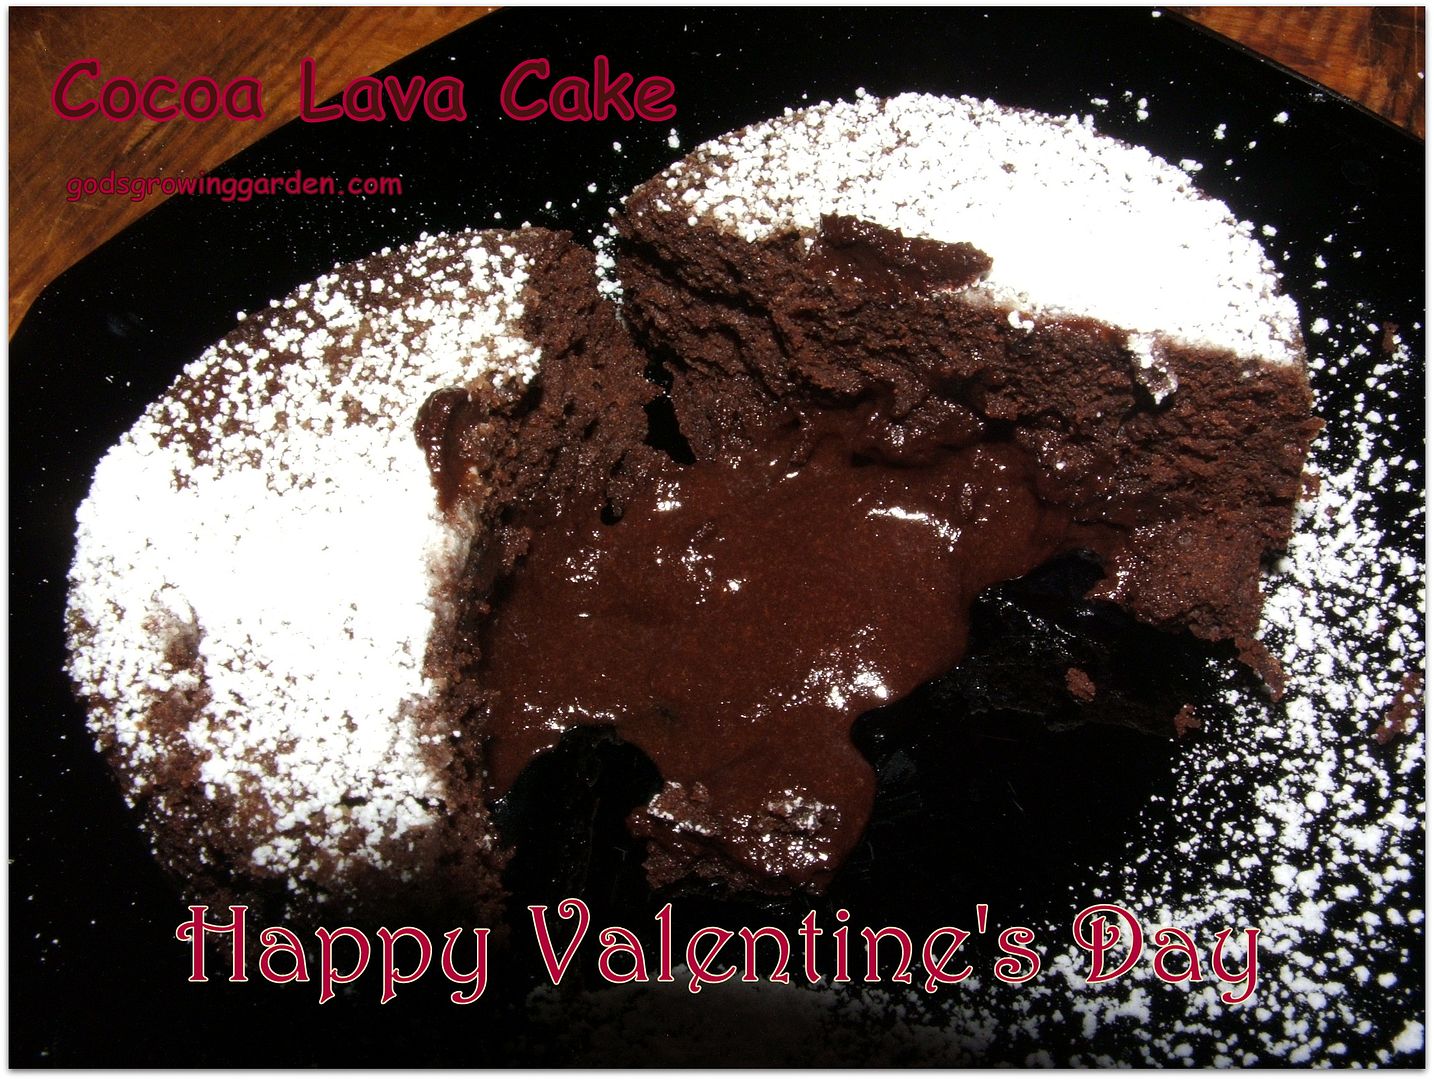 Cocoa Lava Cake by Angie Ouellette-Tower for godsgrowinggarden.com photo 005_zps1dfe2471.jpg